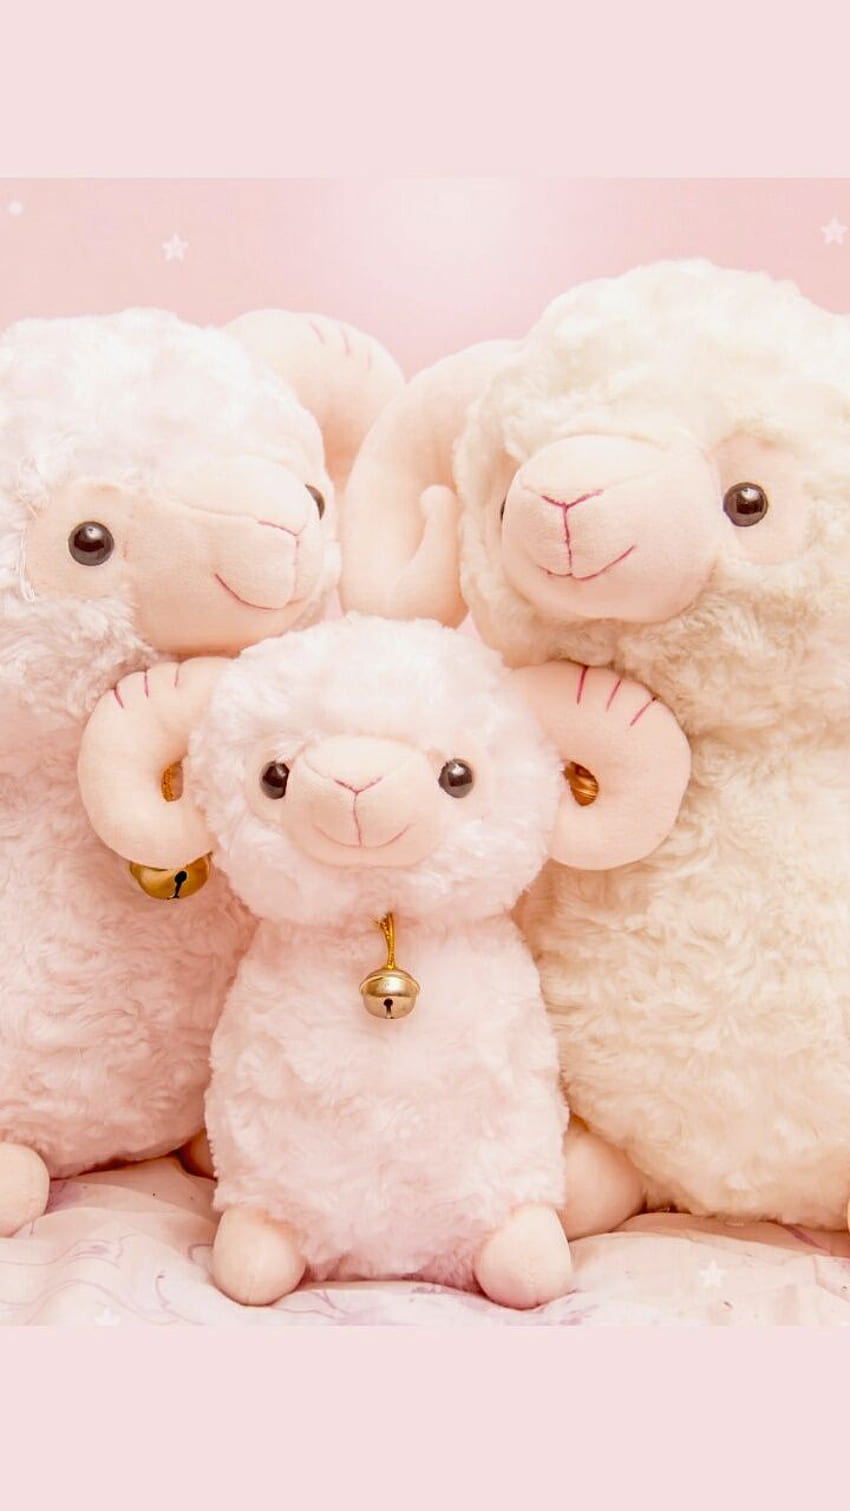 background, bell, chime, girl, iphone, kawaii, lamb, pastel, plush, plush toy, sheep, soft toy, still life, style, toy, toys, , , we heart it, iphone, cute toy, pastel color, iphone HD phone wallpaper